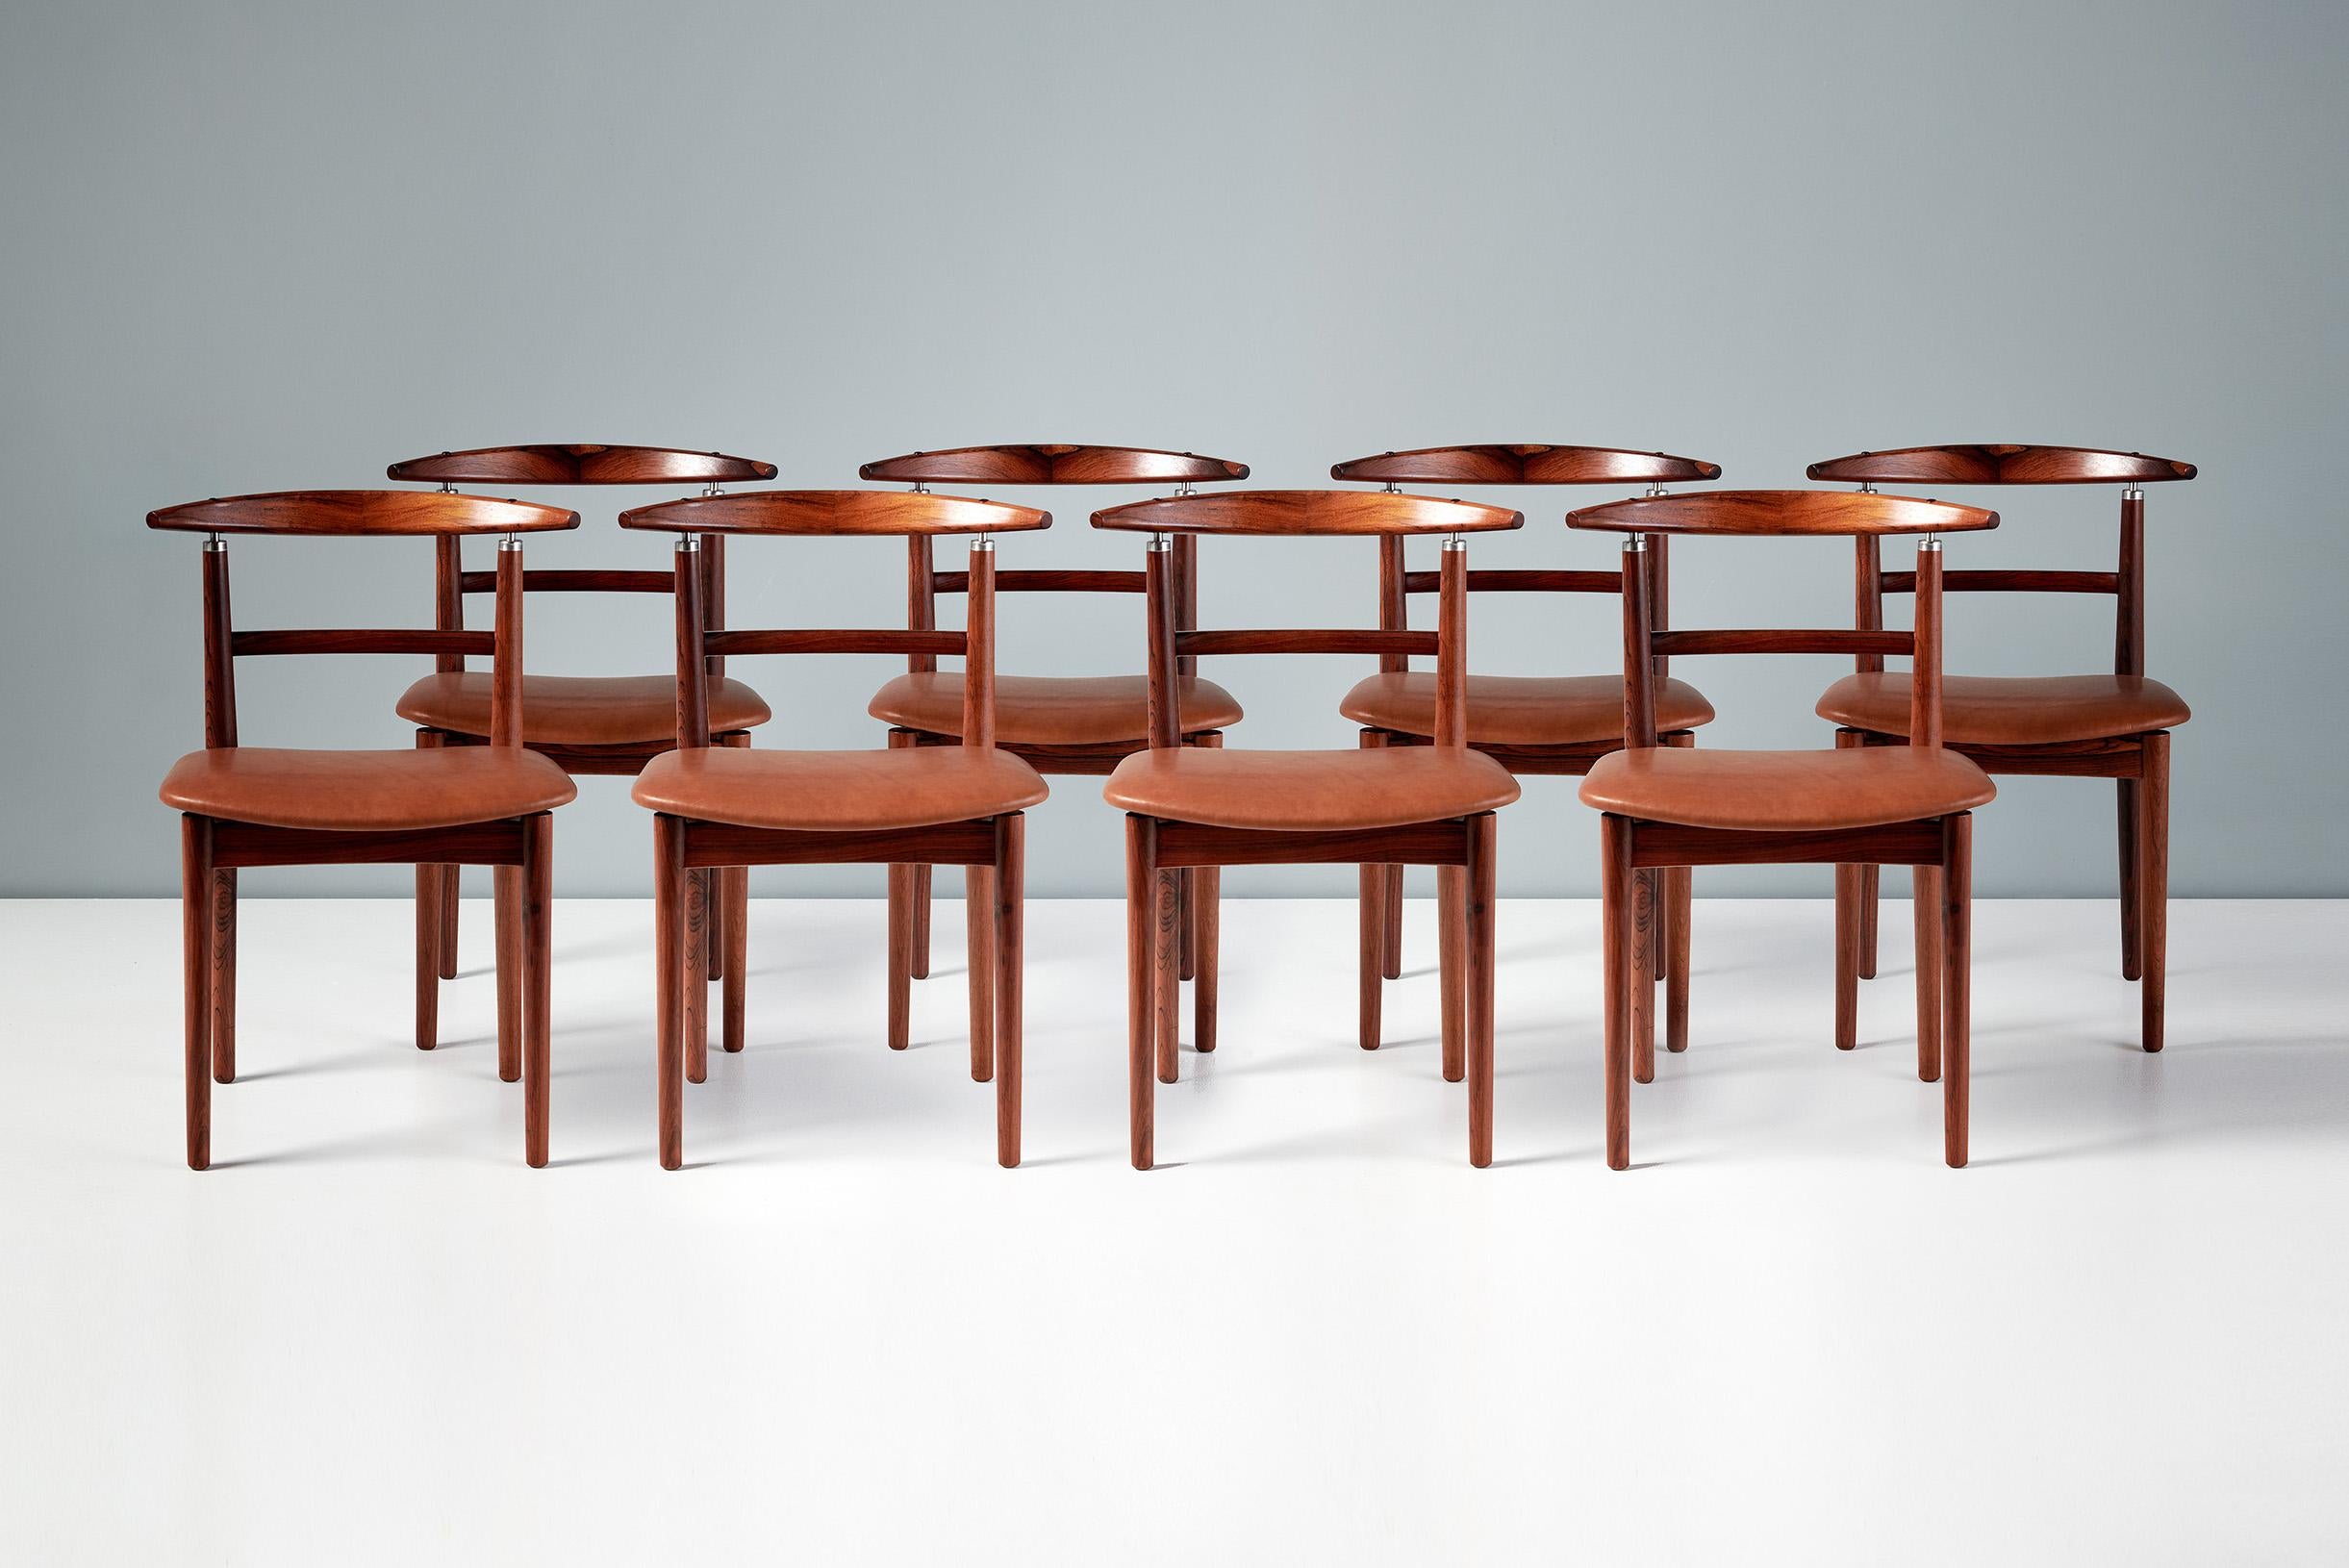 Borge Rammeskov Set of 8 Danish Rosewood Dining Chairs, c1960s For Sale 5